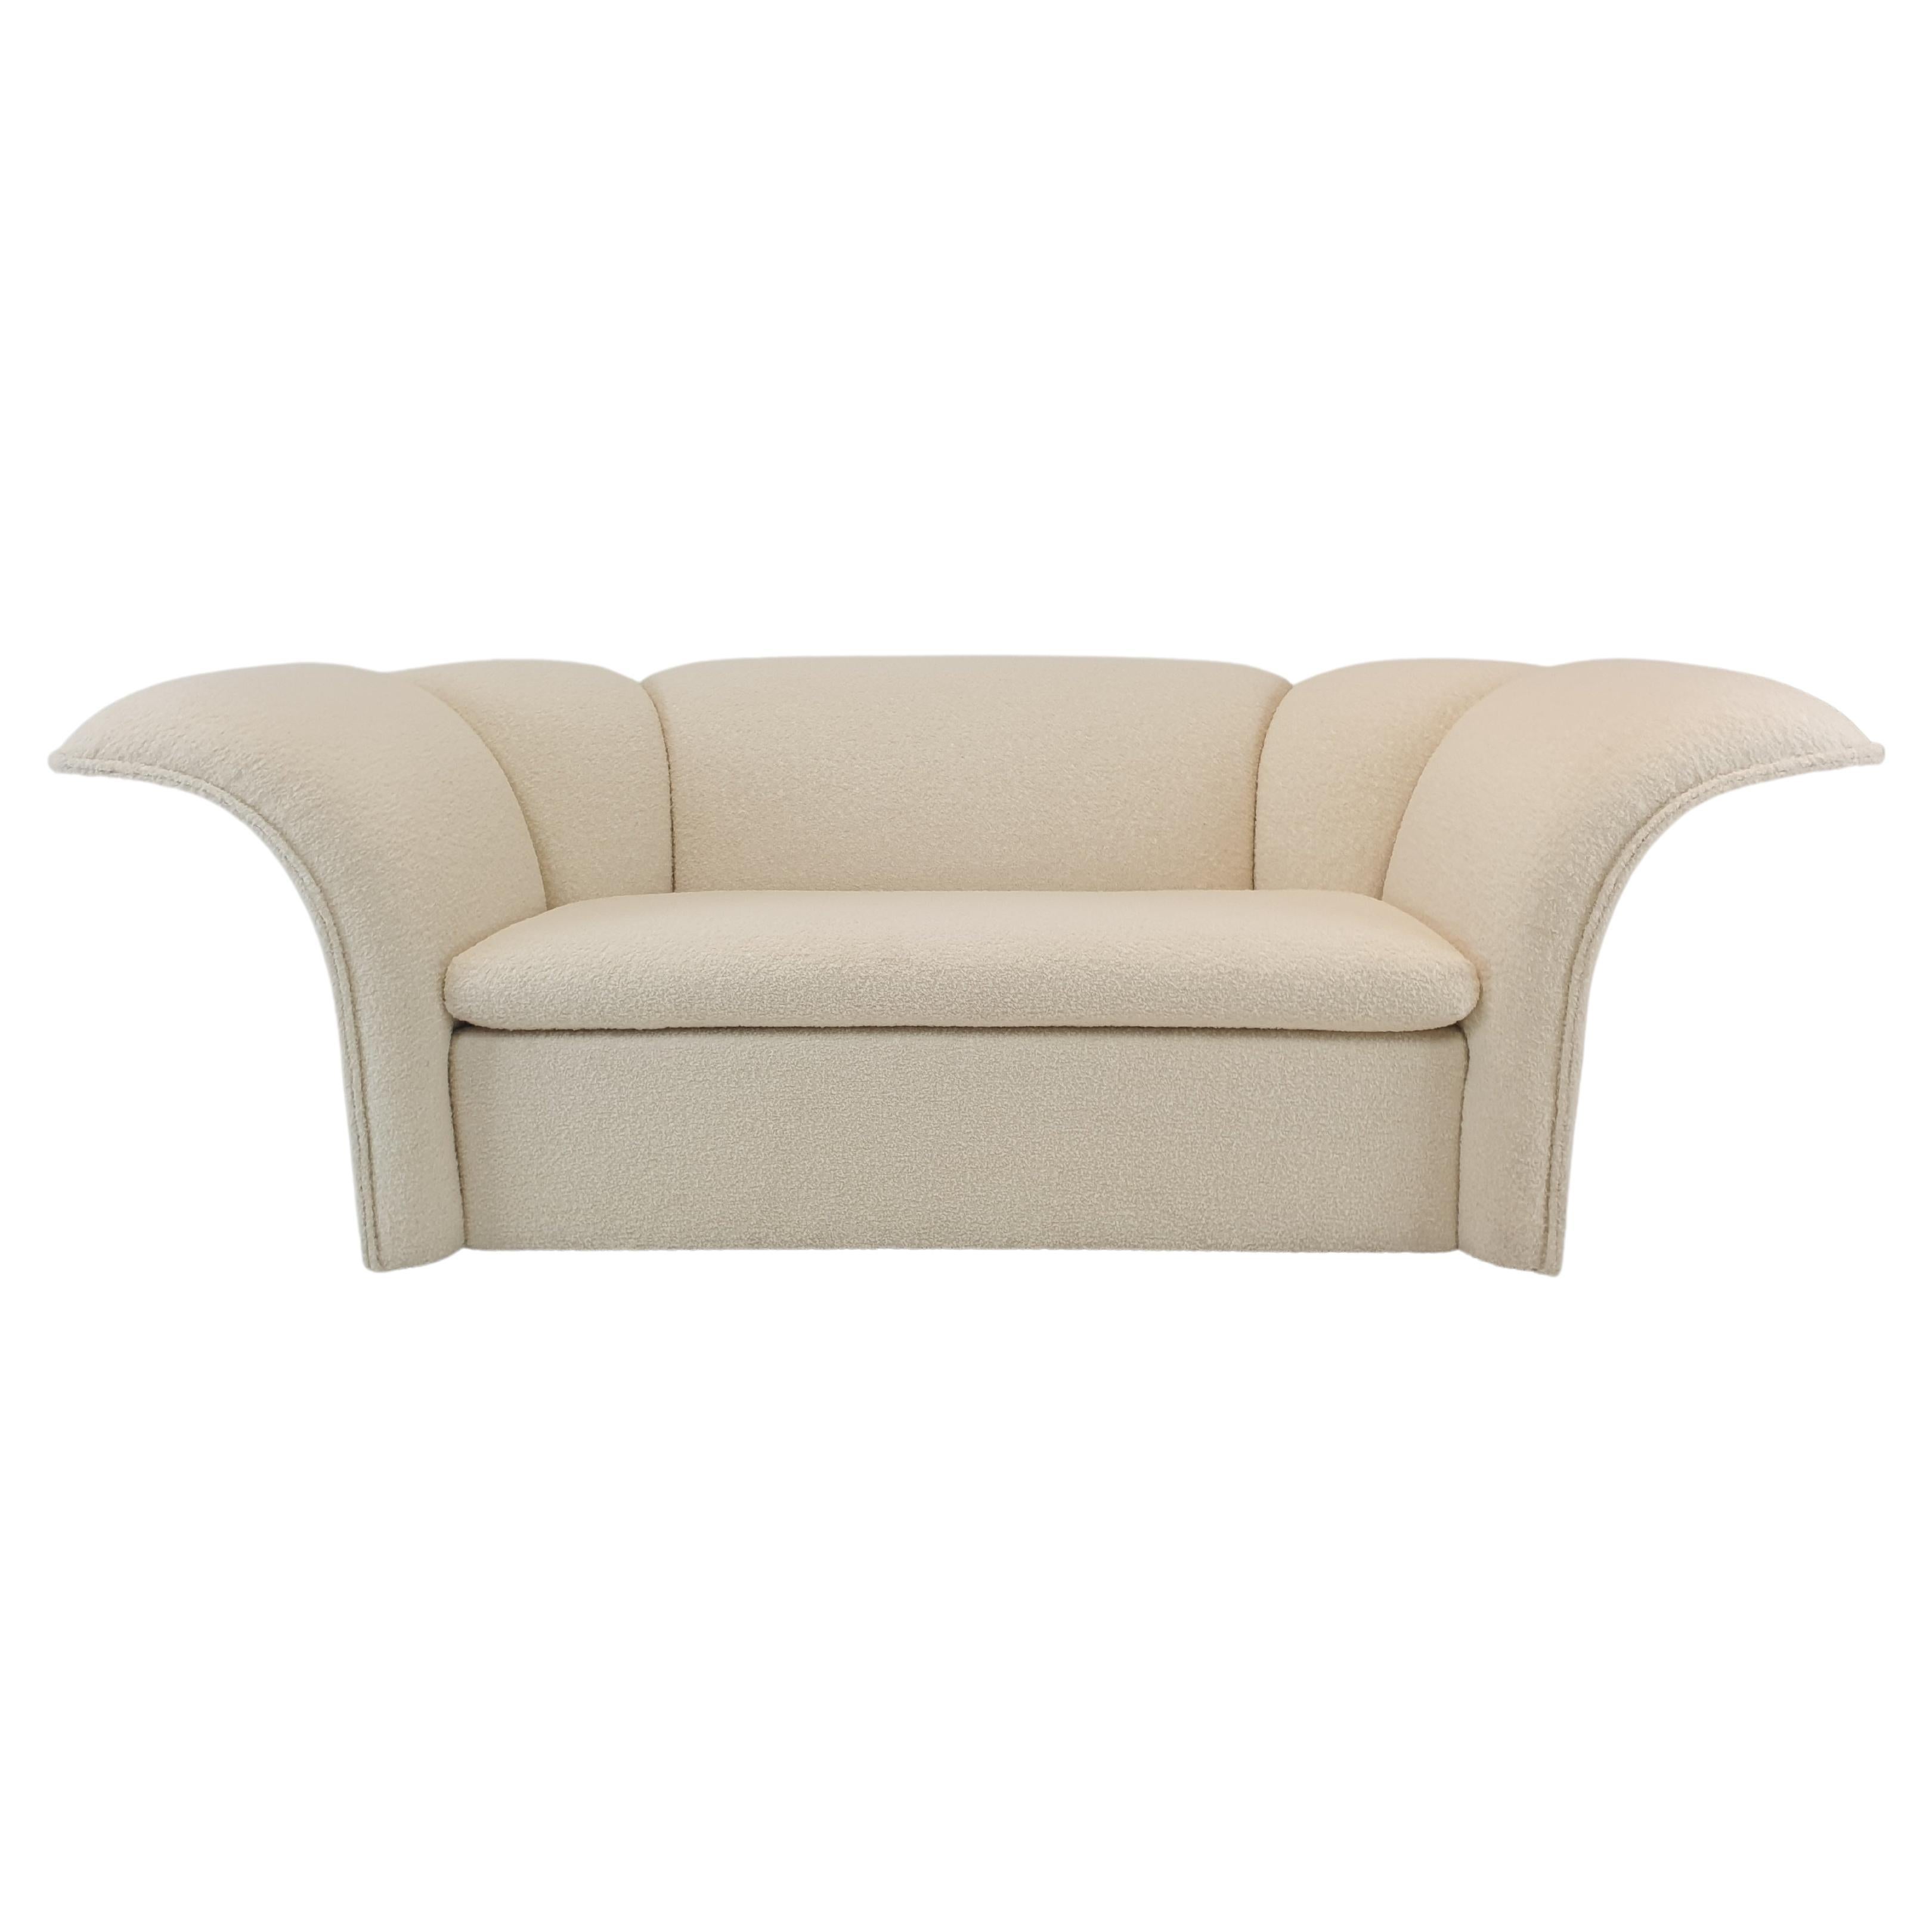 What is a curved back sofa?